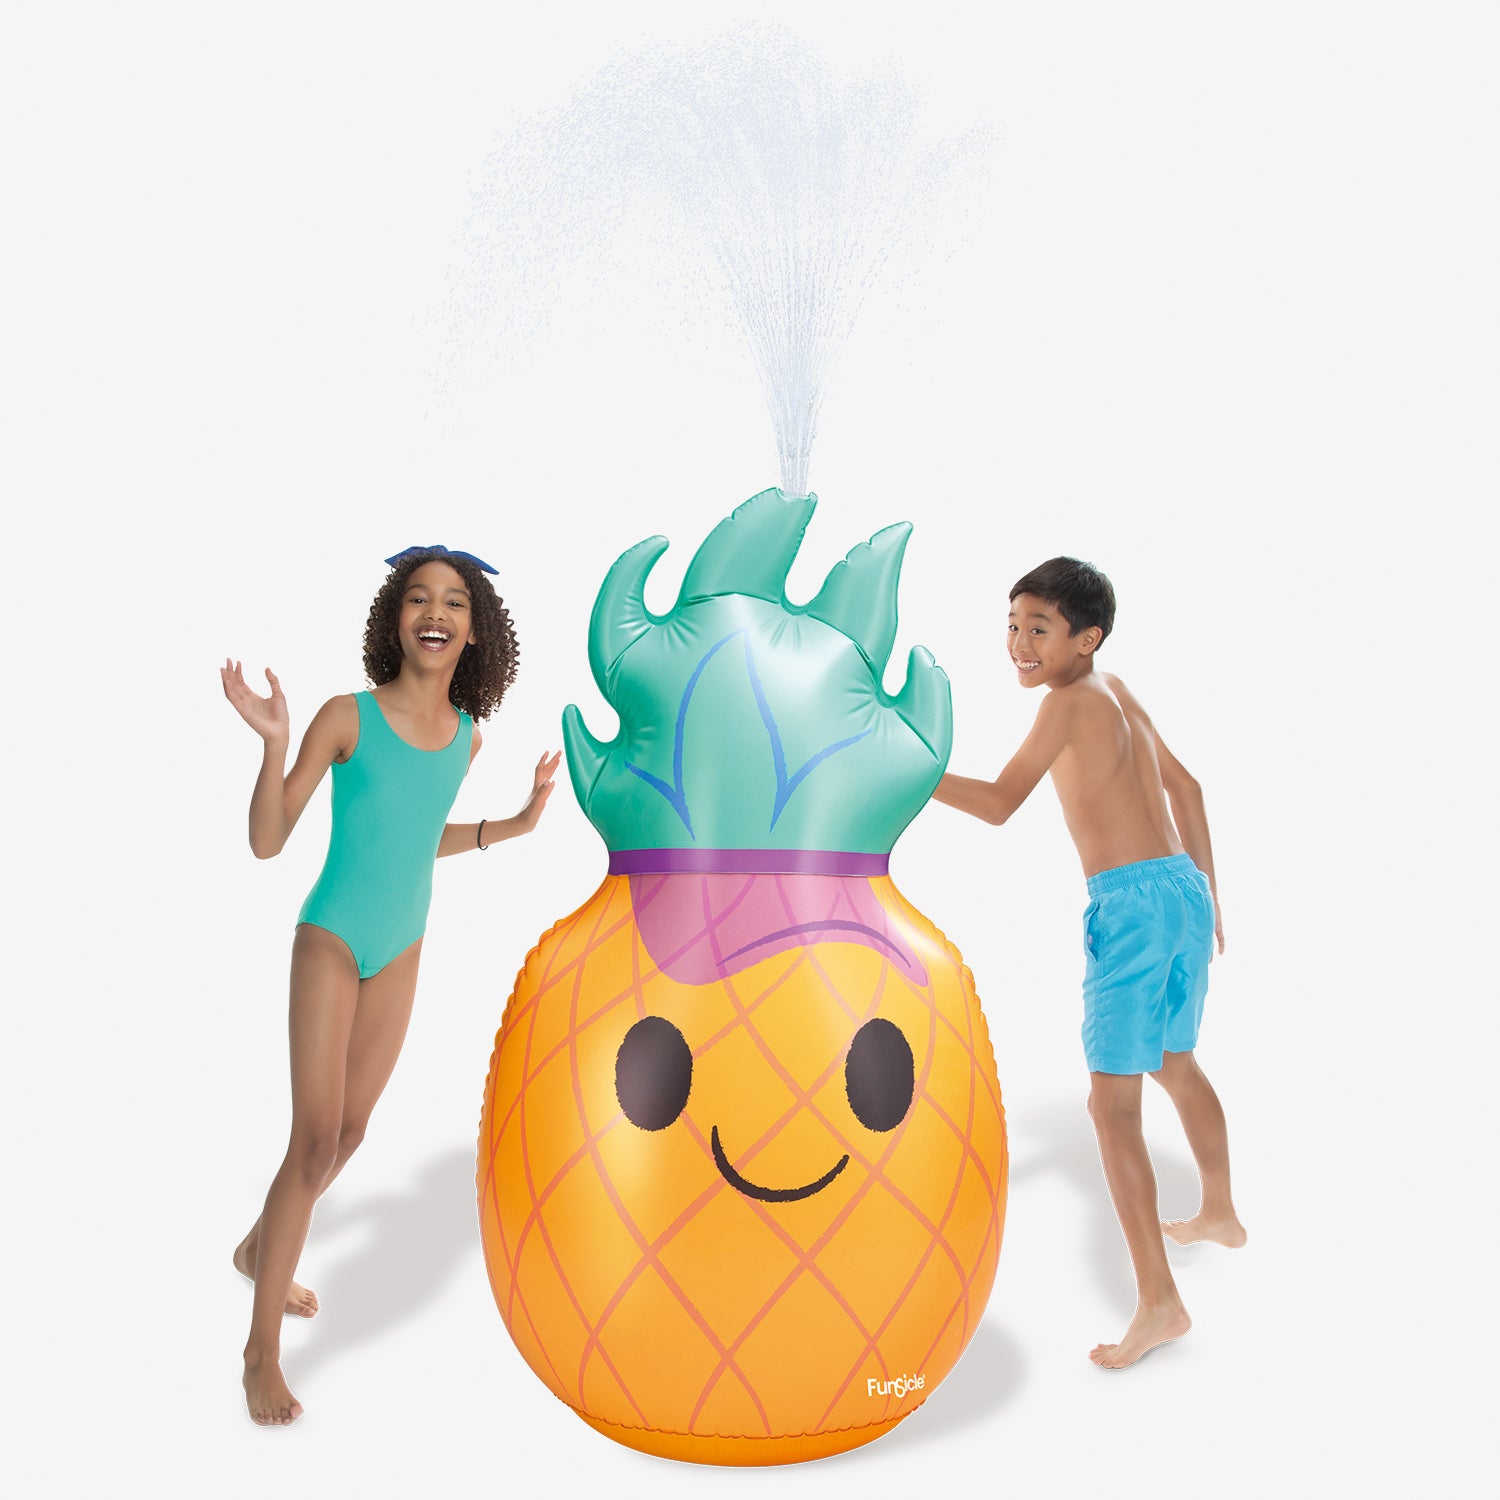 Funsicle Groovy Pineapple Sprinkler with two models around it